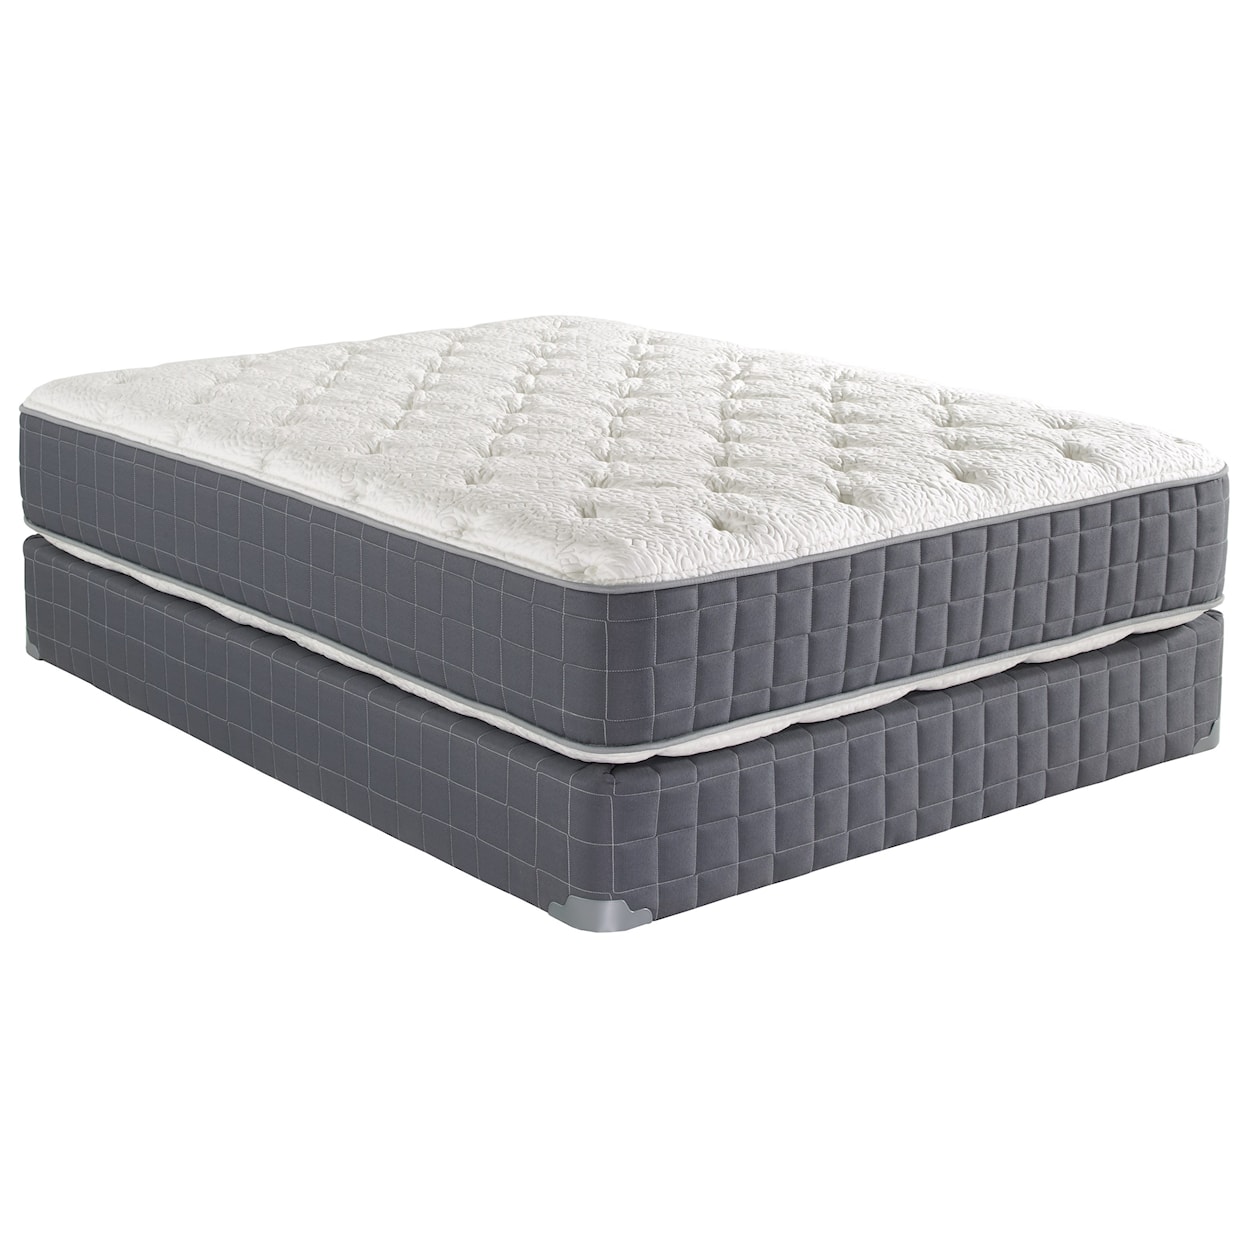 Spring Air Heritage II Full 13" Two Sided Mattress Set